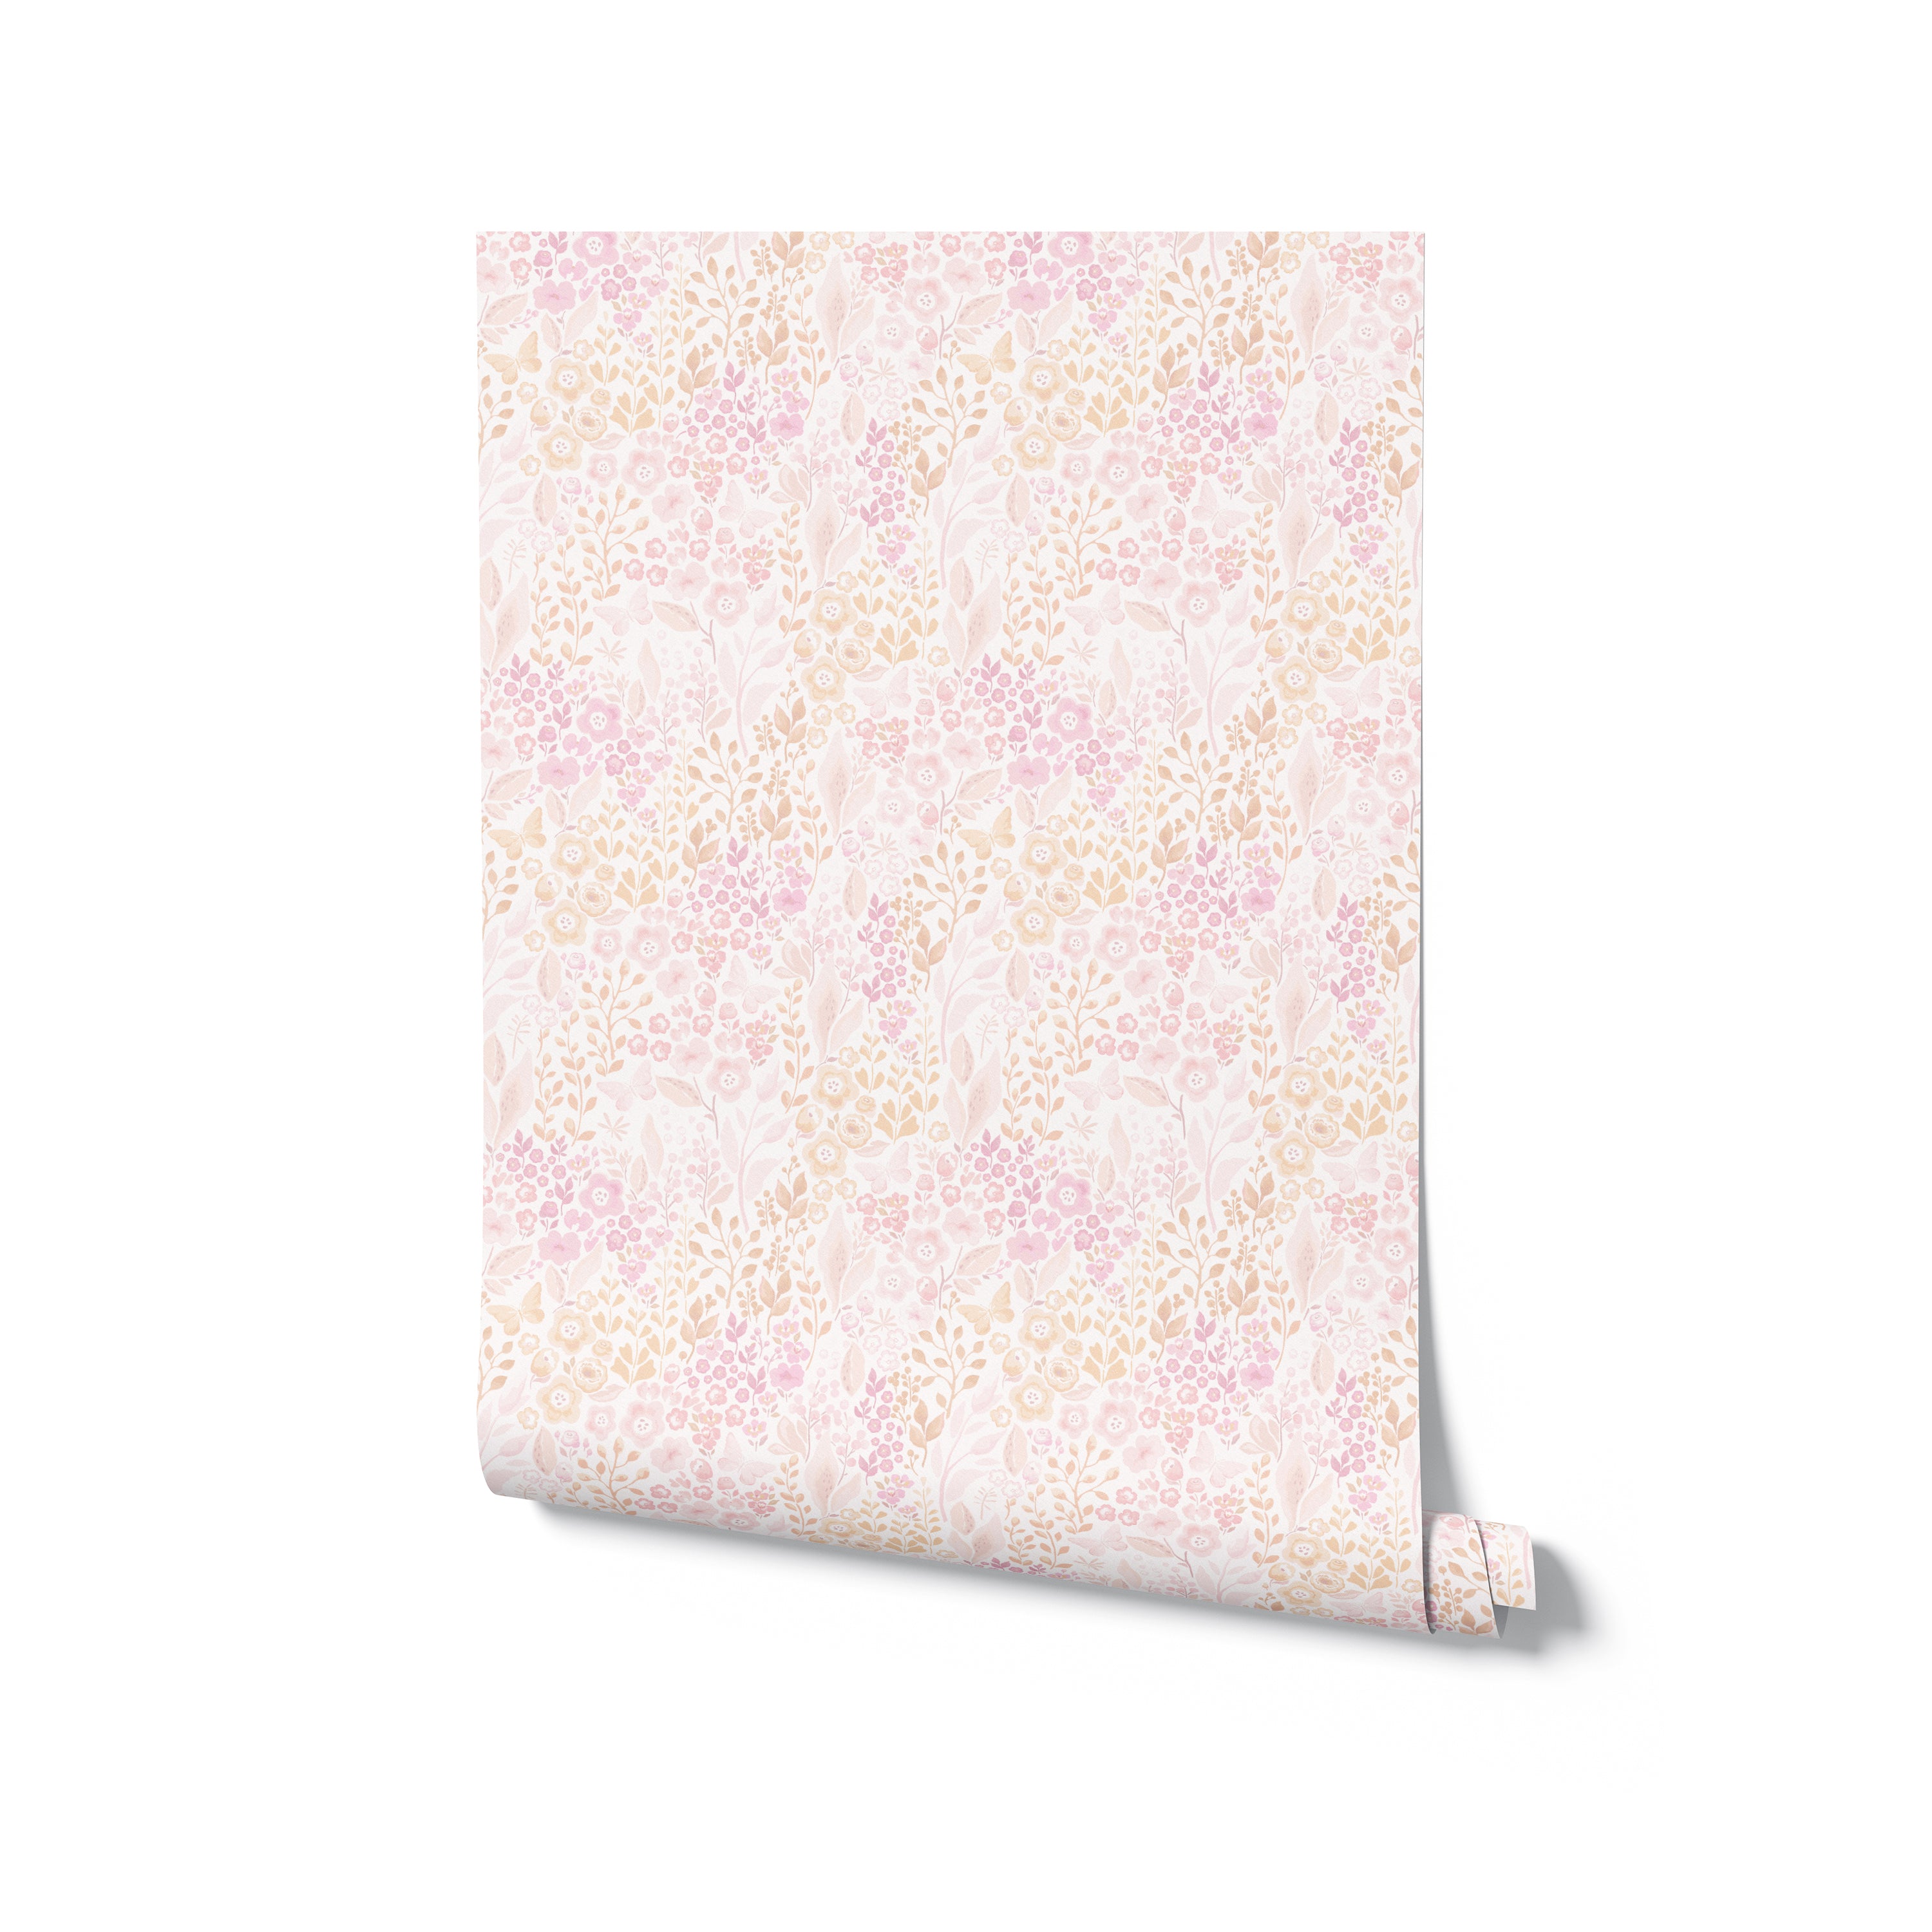 a roll of "Pretty Petals Wallpaper - 12.5"." The image showcases the wallpaper roll partially unrolled to reveal the continuous, delicate floral print. It's an illustration of the product ready for application, highlighting the intricate and tender design ideal for a child's room or a feminine space.